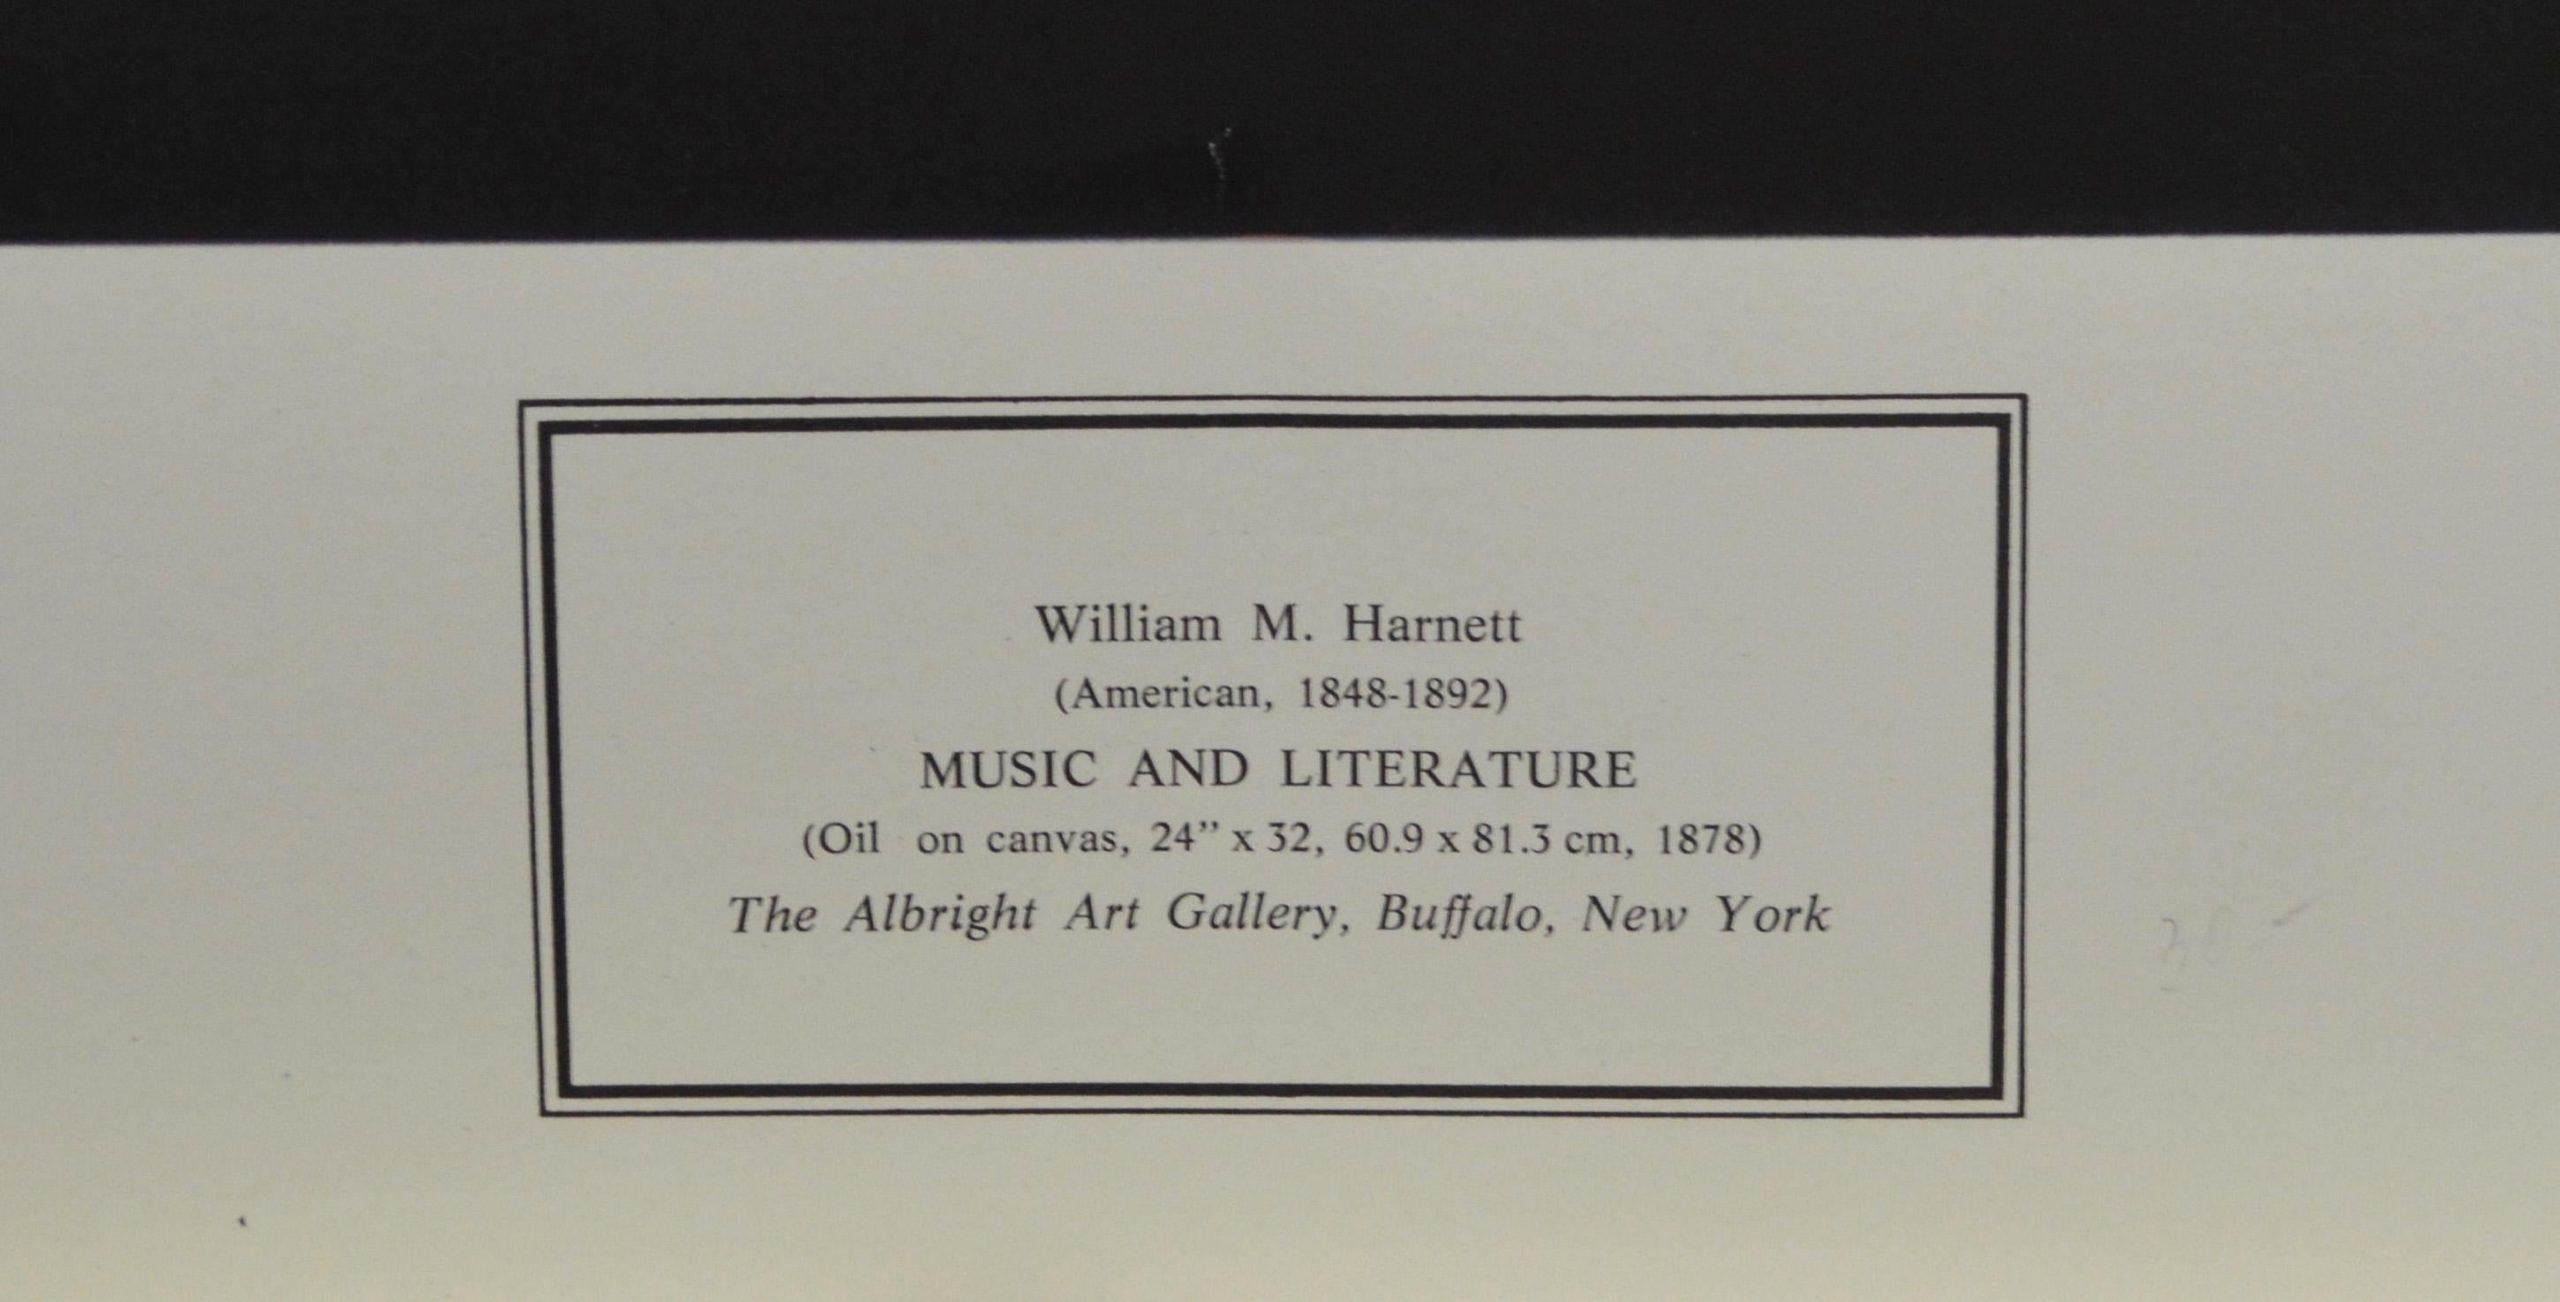 “Music and Literature” Poster.  Copyright 1977 New York Graphic Society Ltd. - Print by William M. Harnett